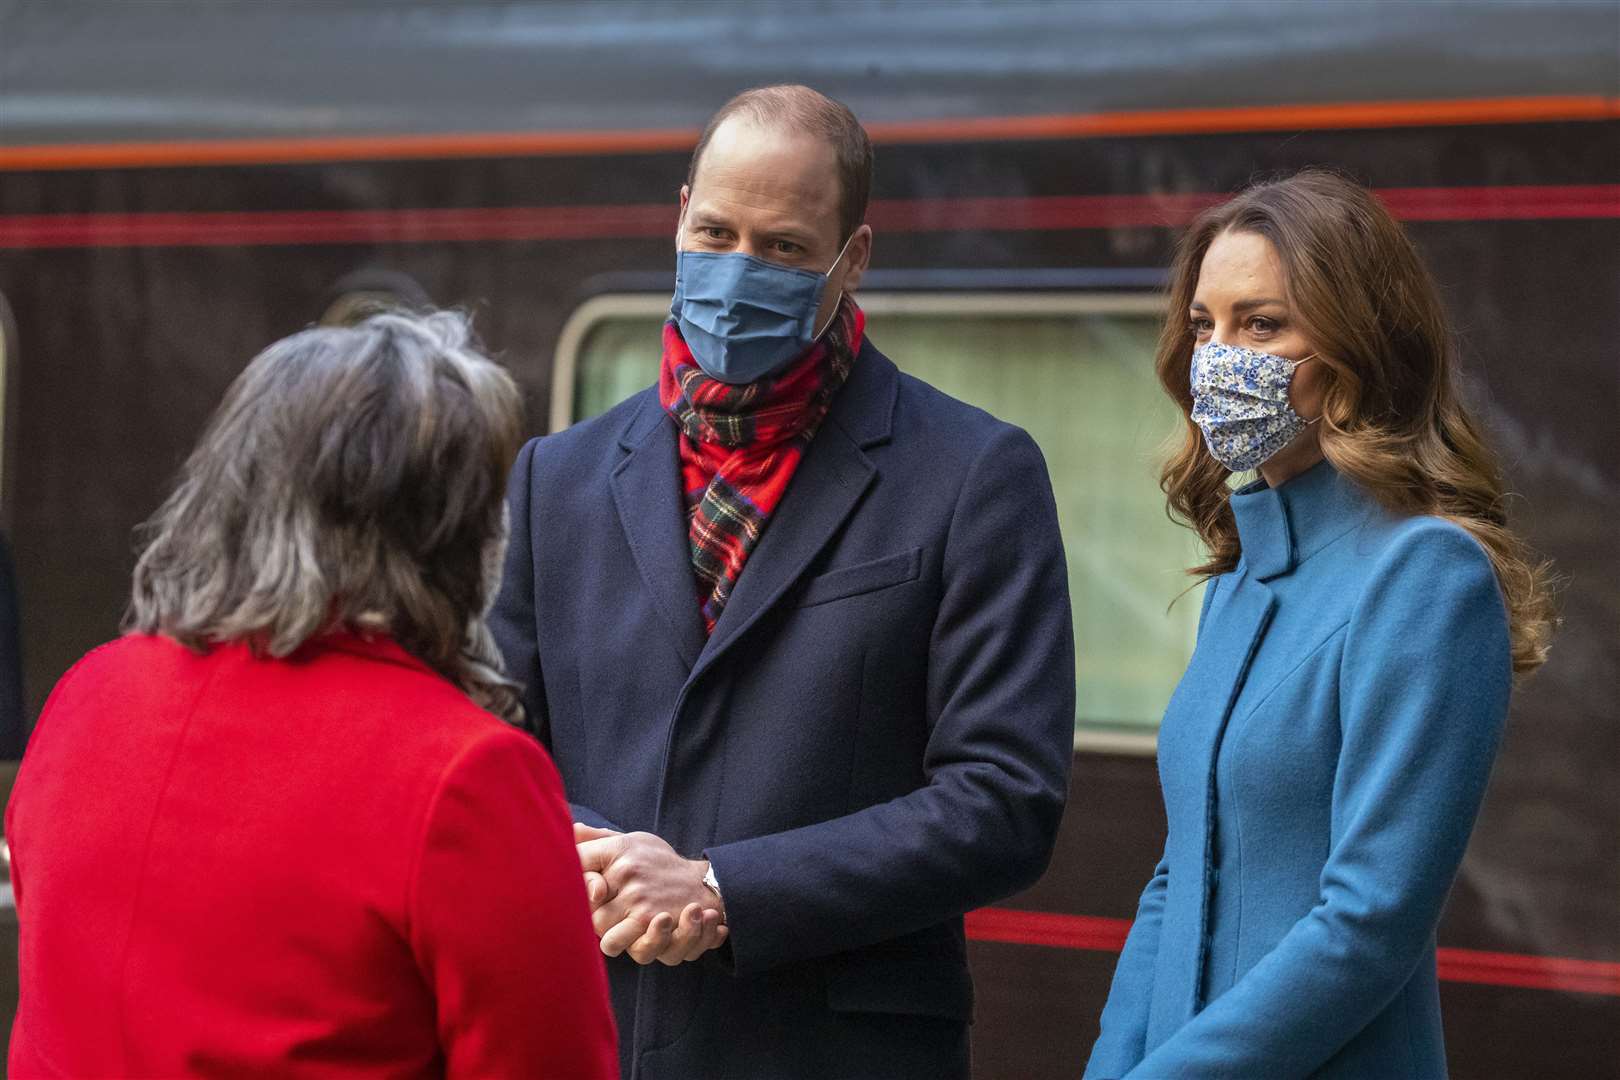 The Duke and Duchess of Cambridge are met at Edinburgh Waverley Station (Andy Barr/PA)